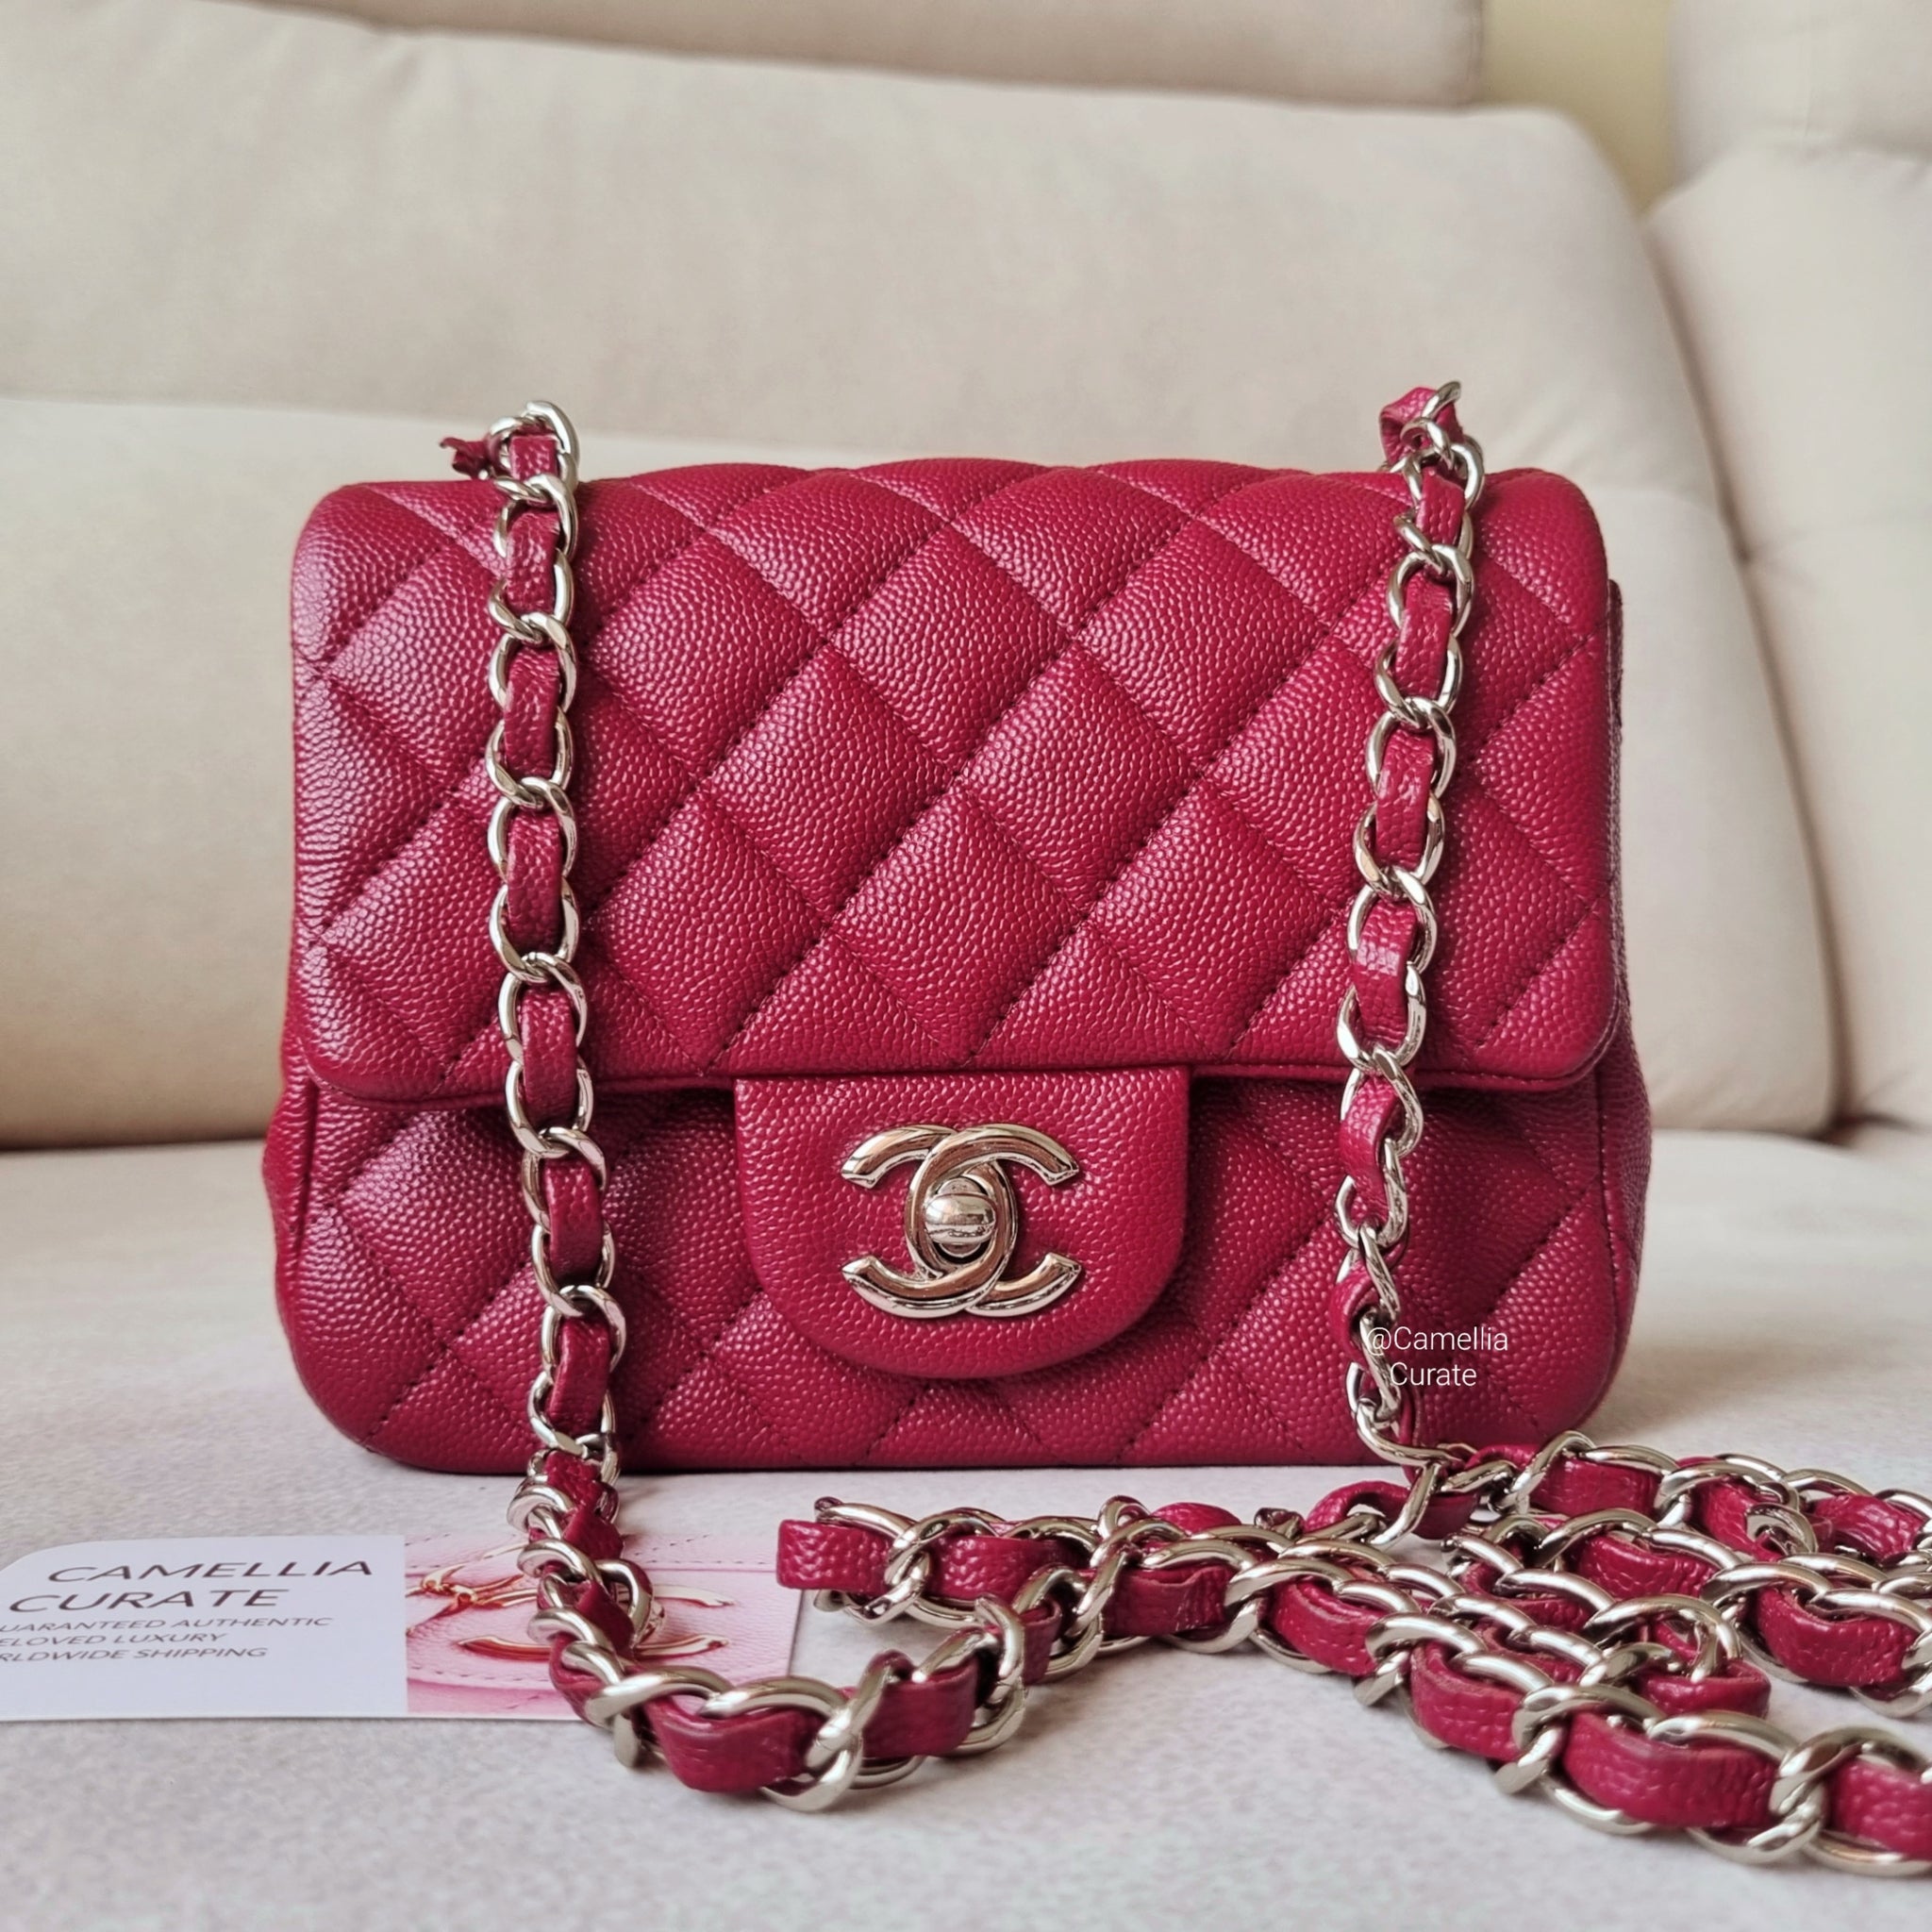 Chanel Raspberry Quilted Lambskin Mini Vanity Case with Chain, myGemma, SG